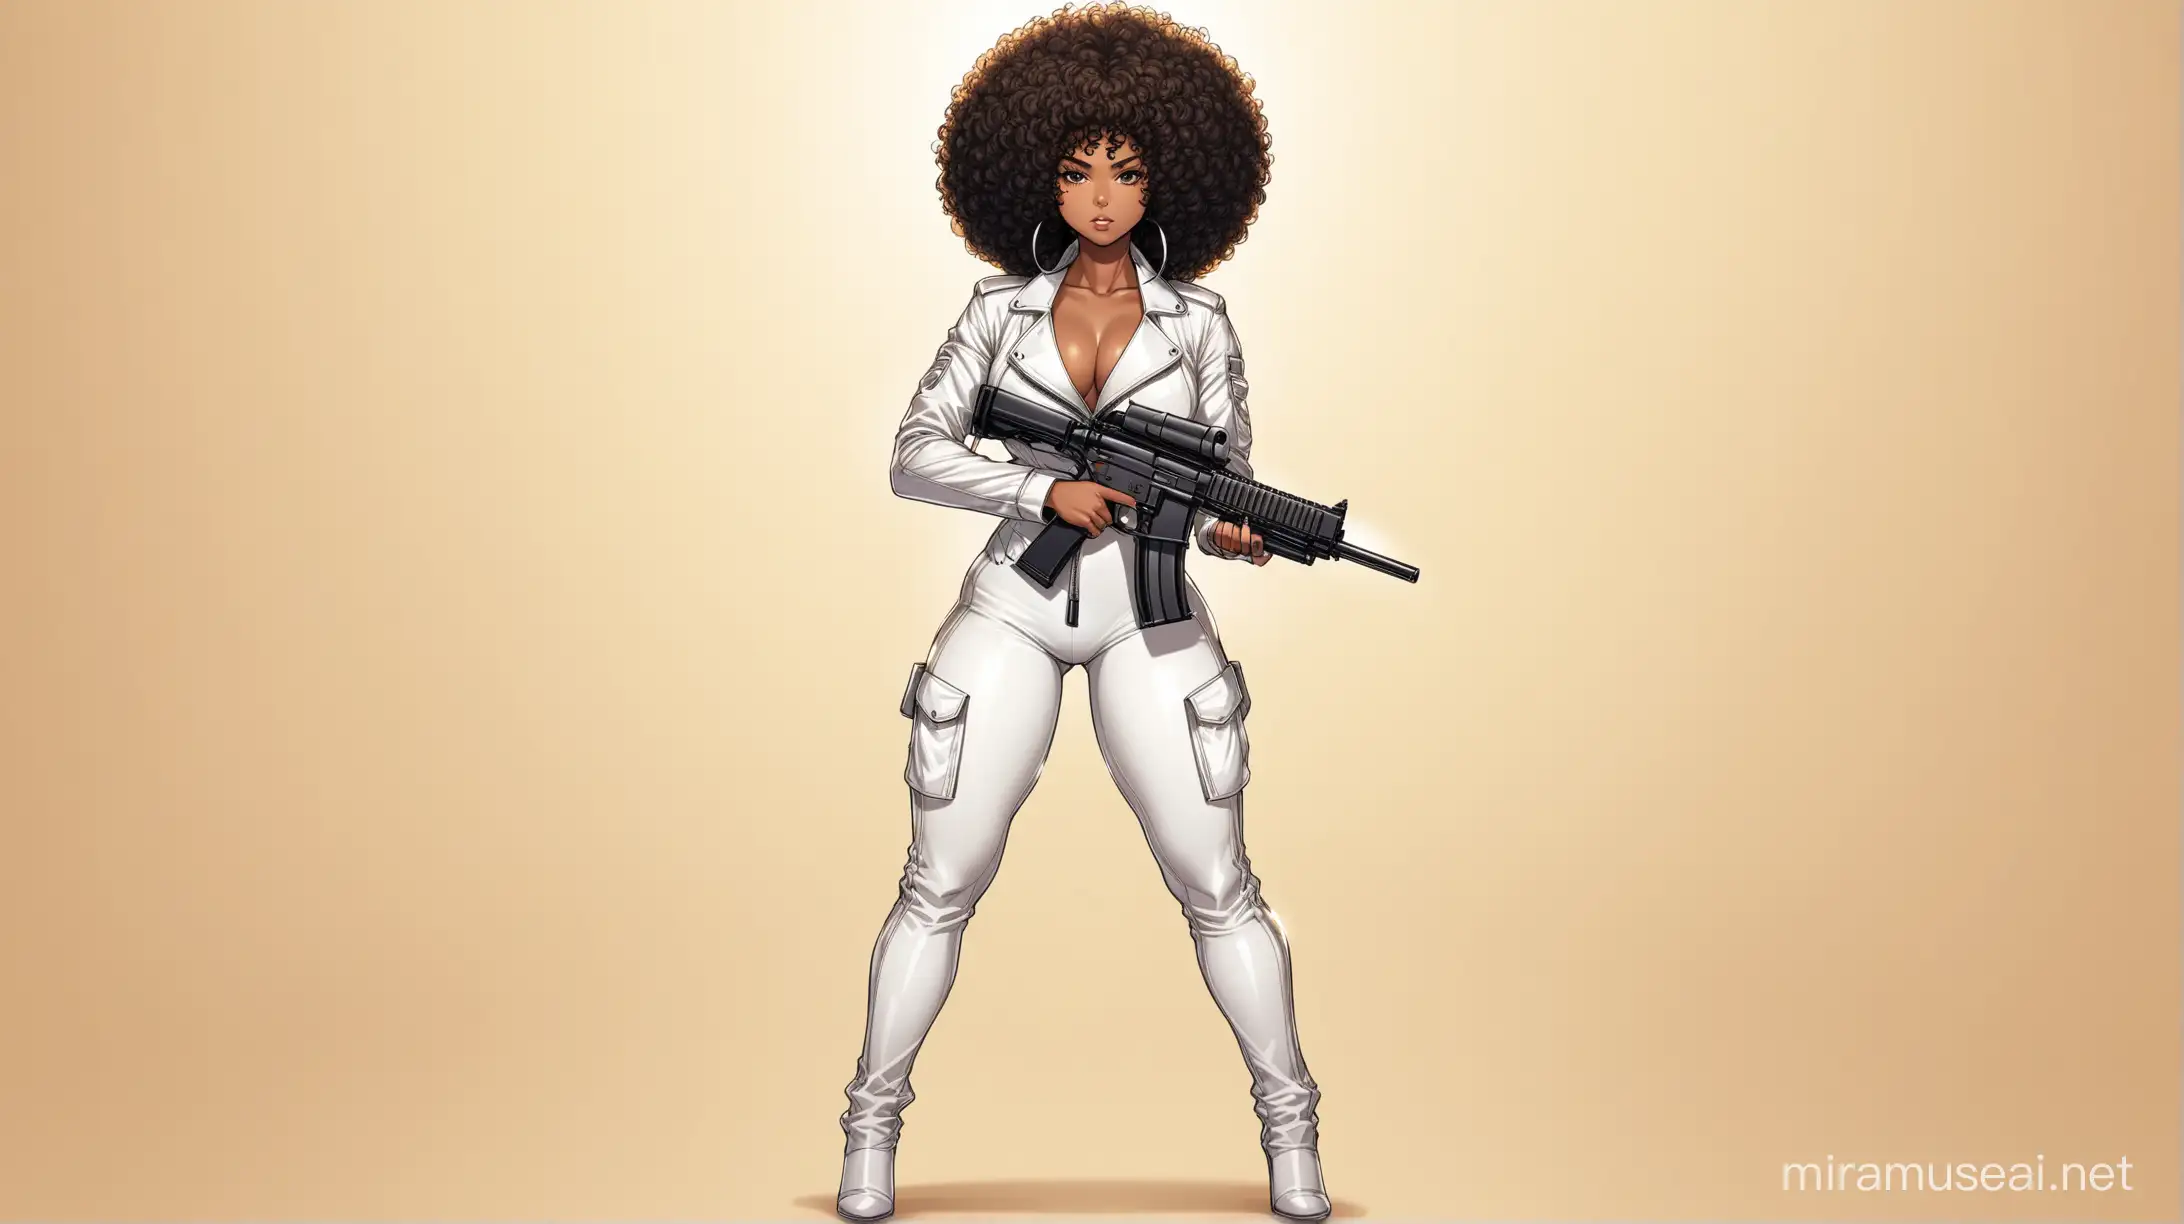 Confident African American Woman in Stylish Biker Suit with Curly Afro Holding Gun